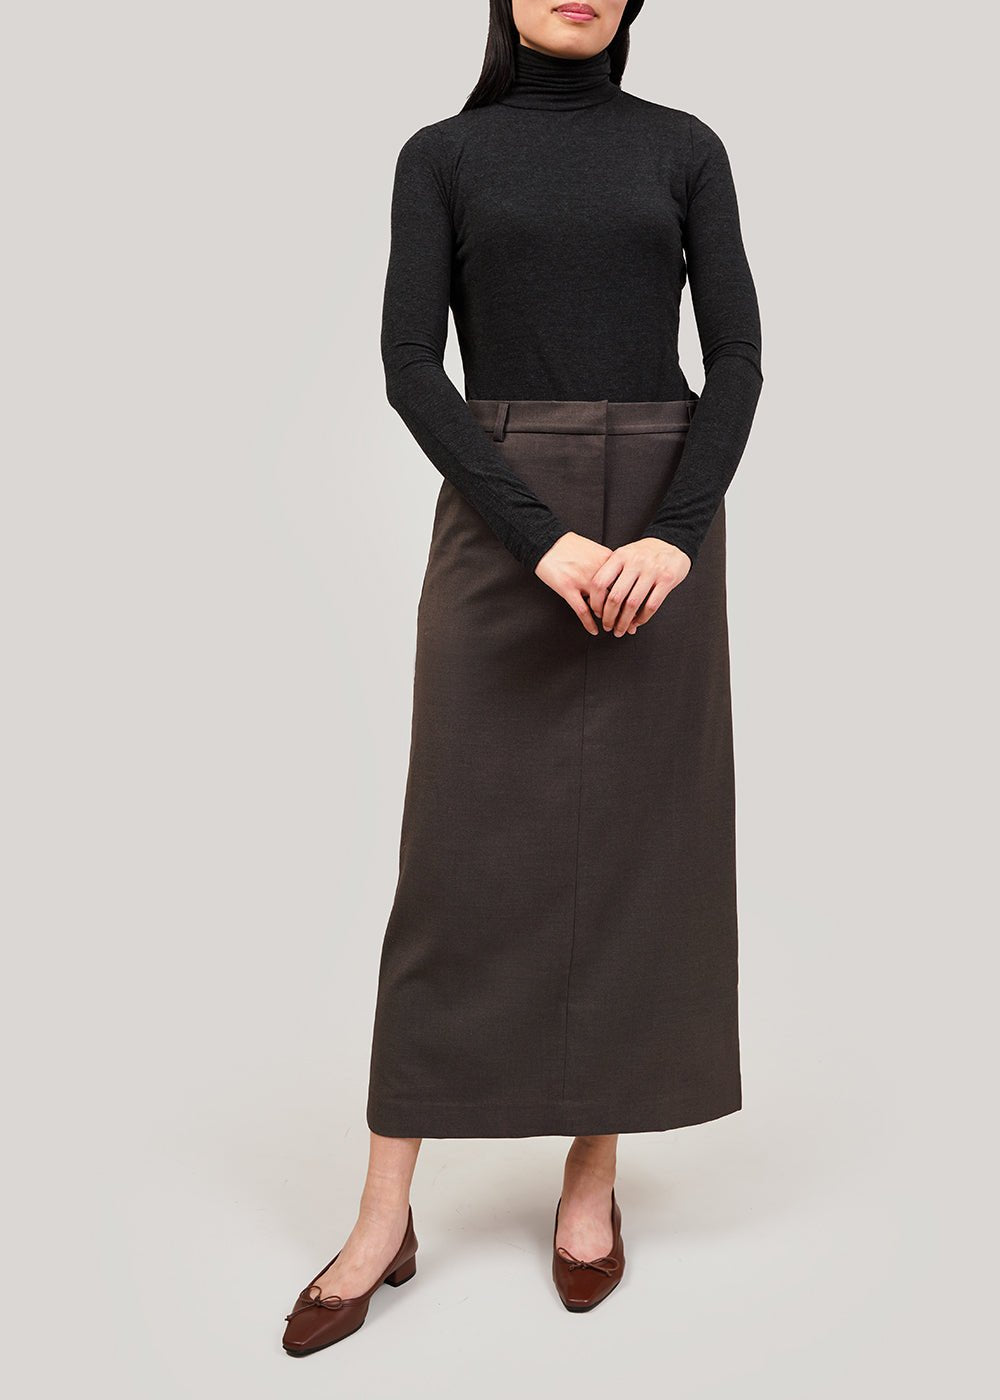 Mijeong Park Black Roll Neck Jersey Top - New Classics Studios Sustainable Ethical Fashion Canada